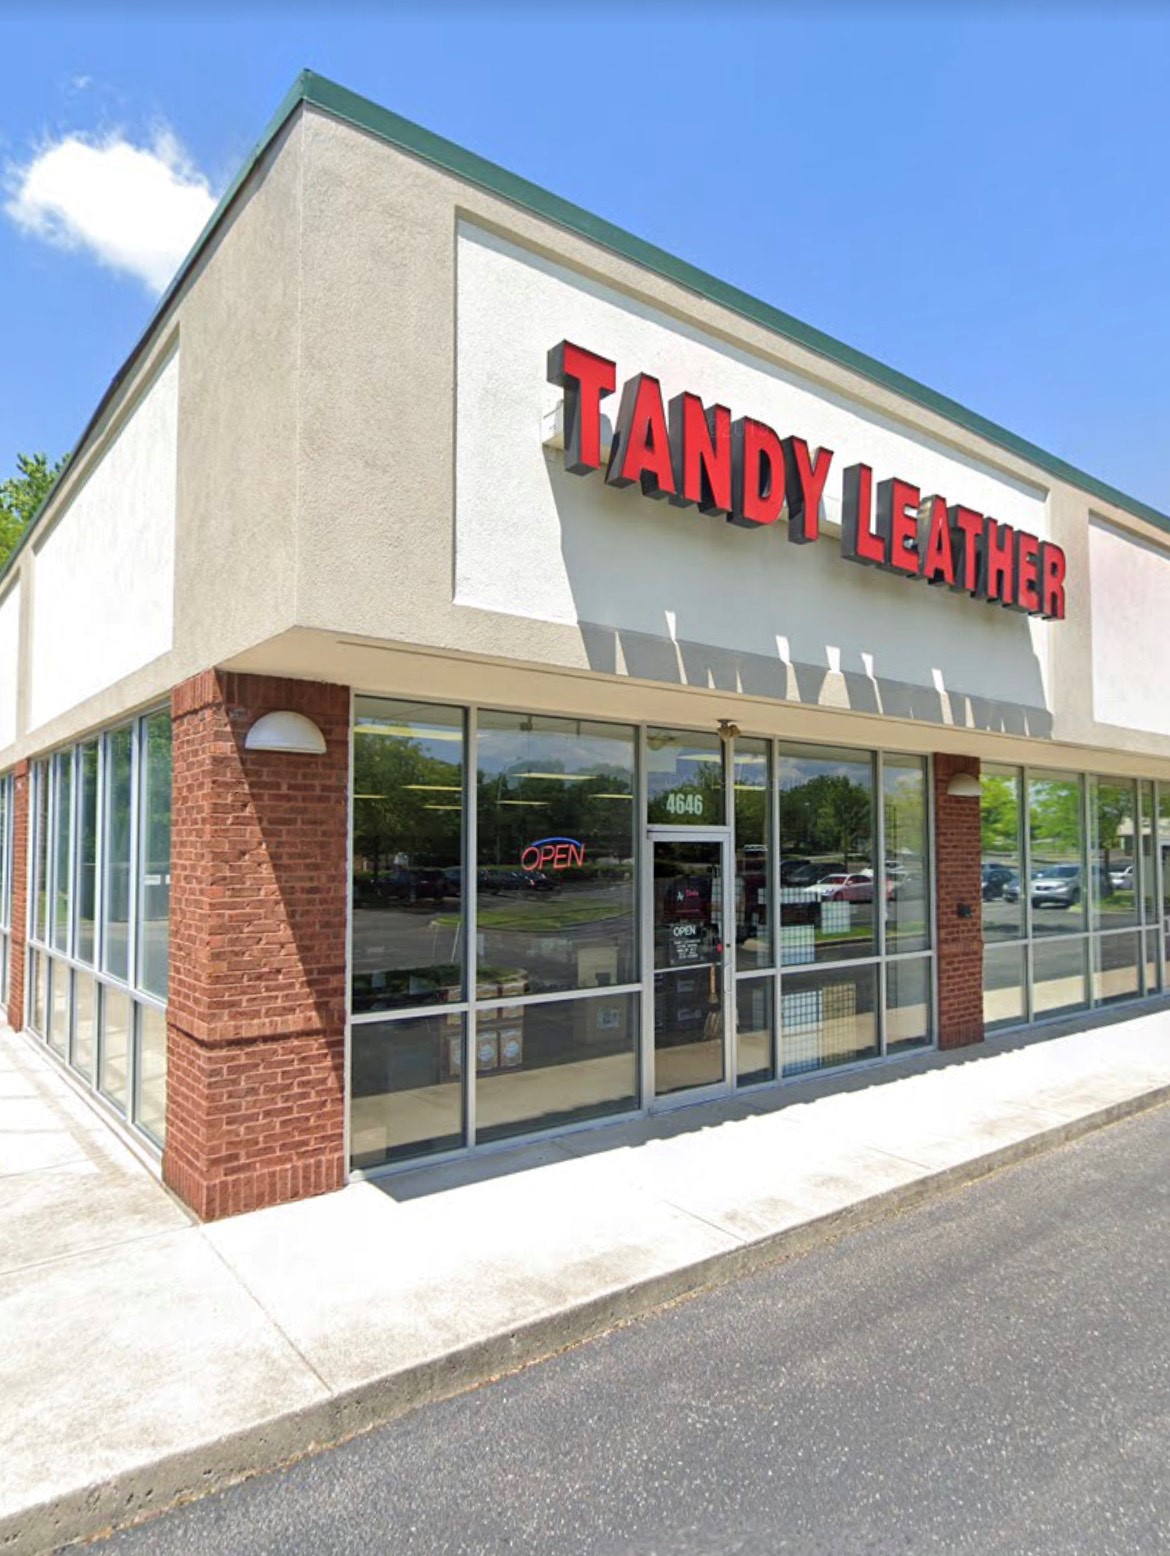 Louisville Store #132 — Tandy Leather, Inc.